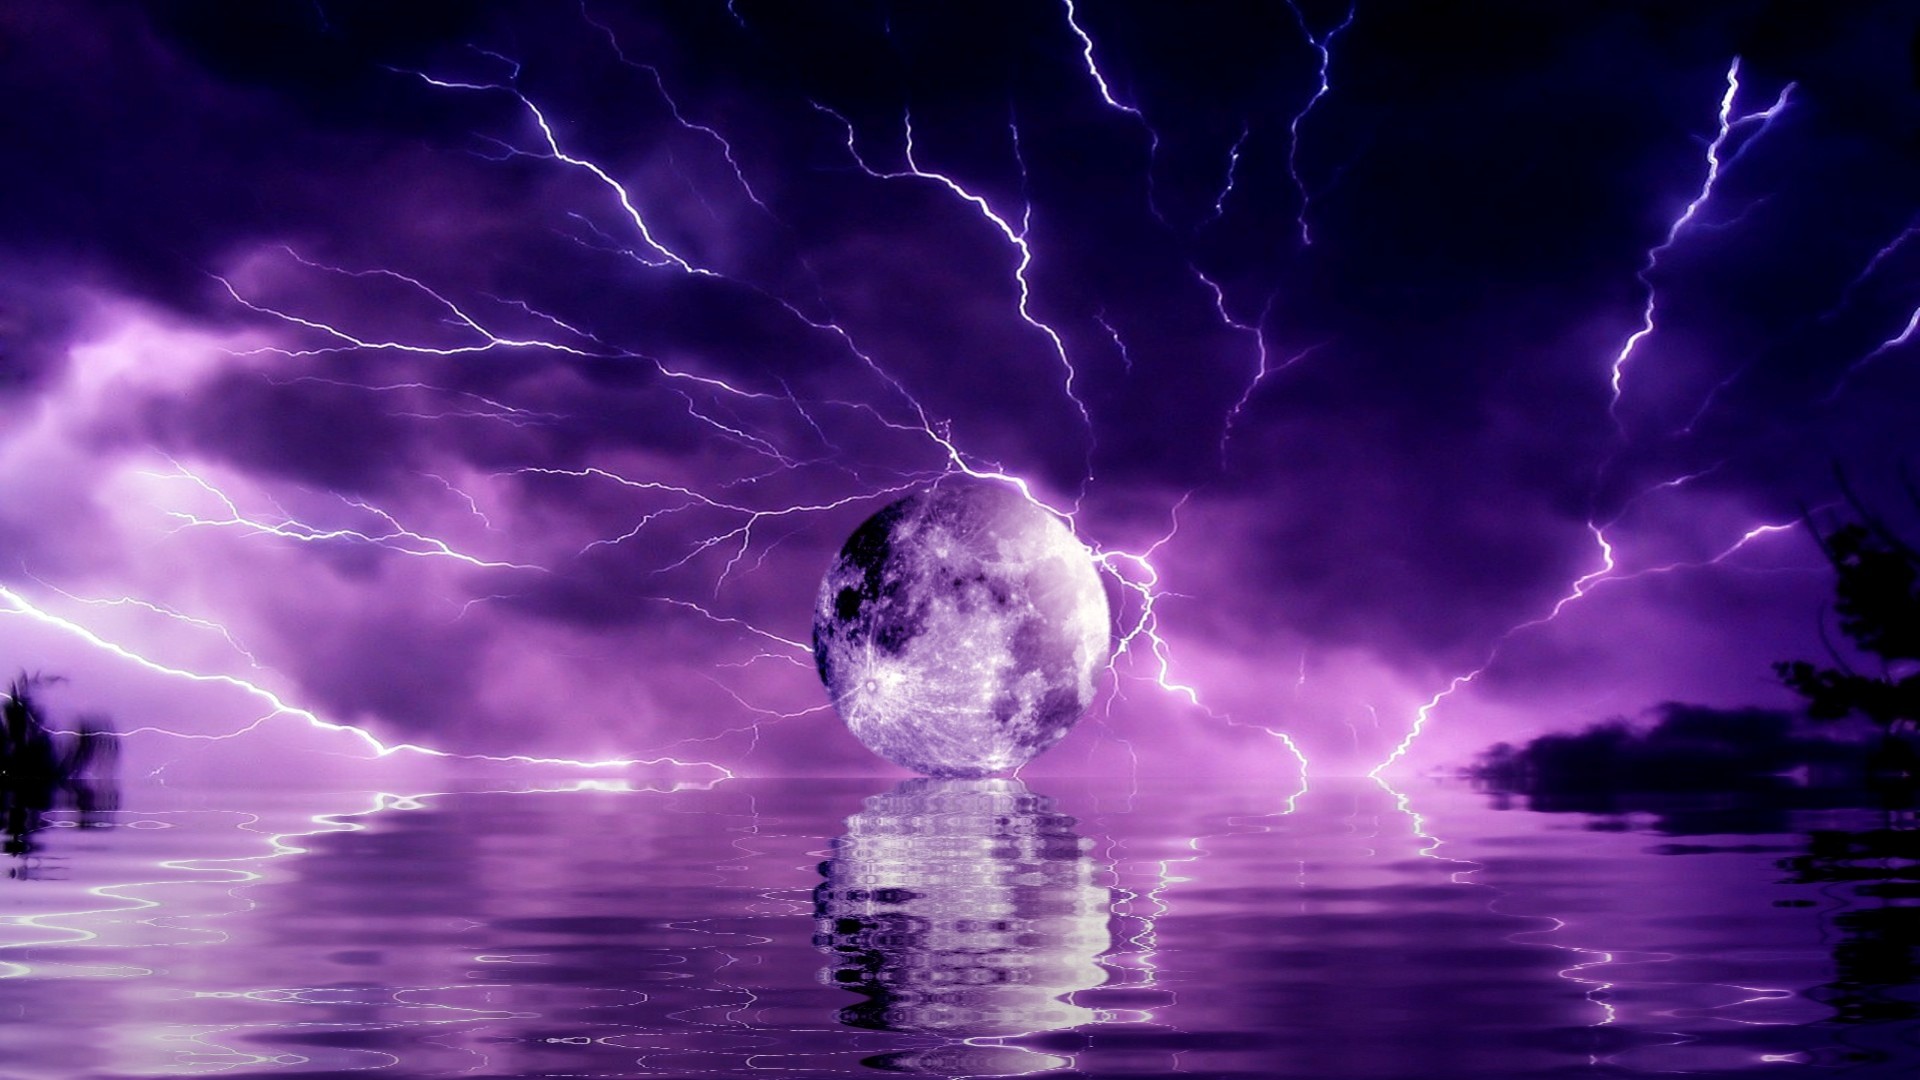 1920x1080 Animated Storm Wallpaper photos Cool Natural Storm Animated Background  